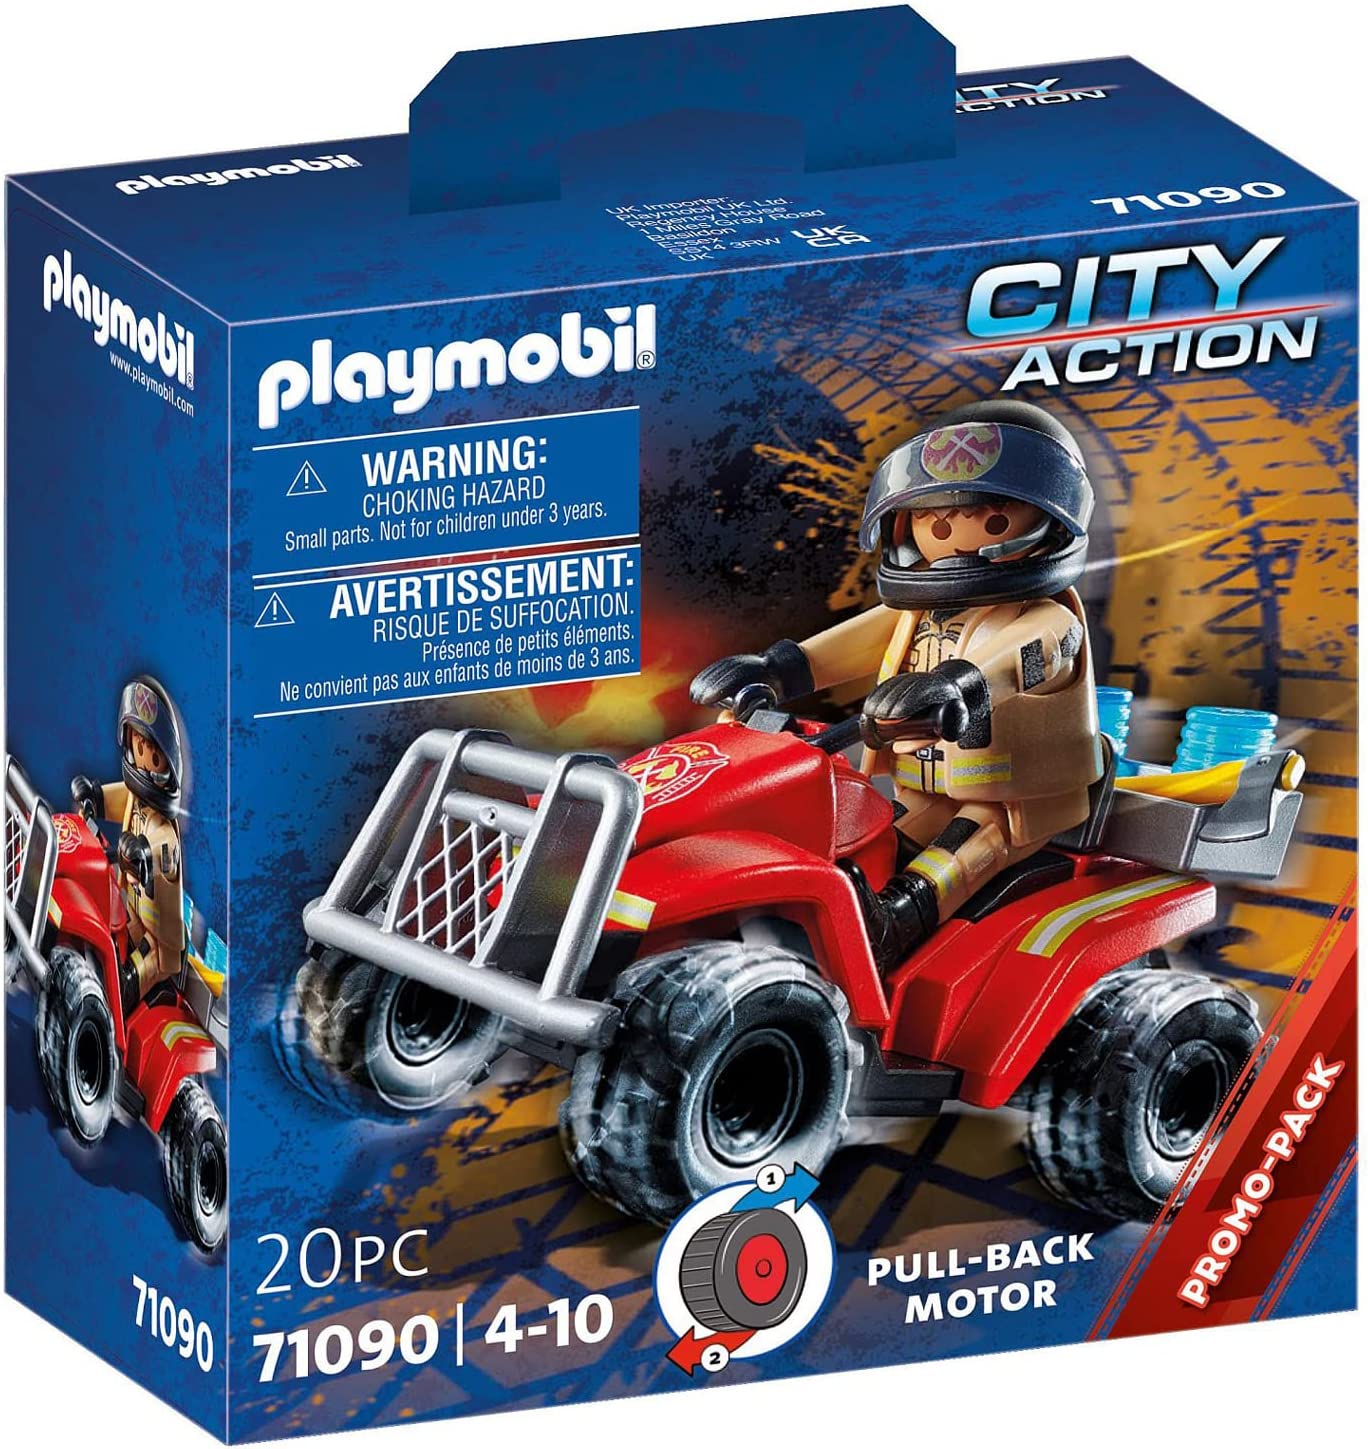 PLAYMOBIL City Action 71090 Fire Engine Speed Quad with Pull-Back Motor for Ages 4 and Up